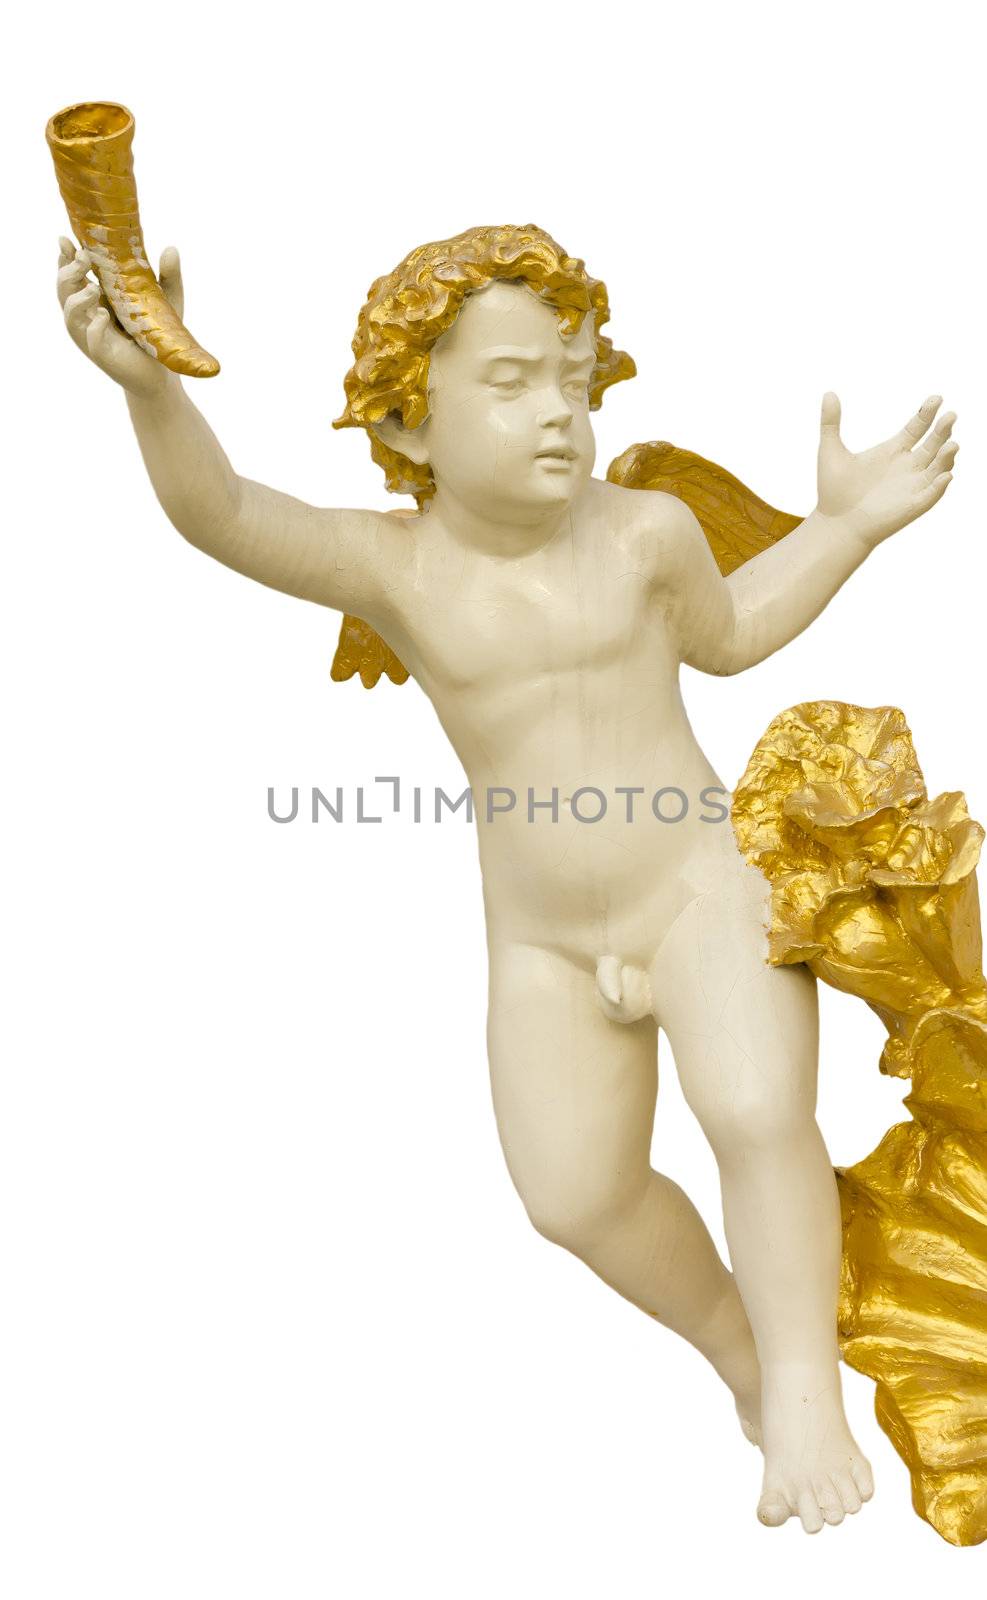 Cupid statue by singkamc